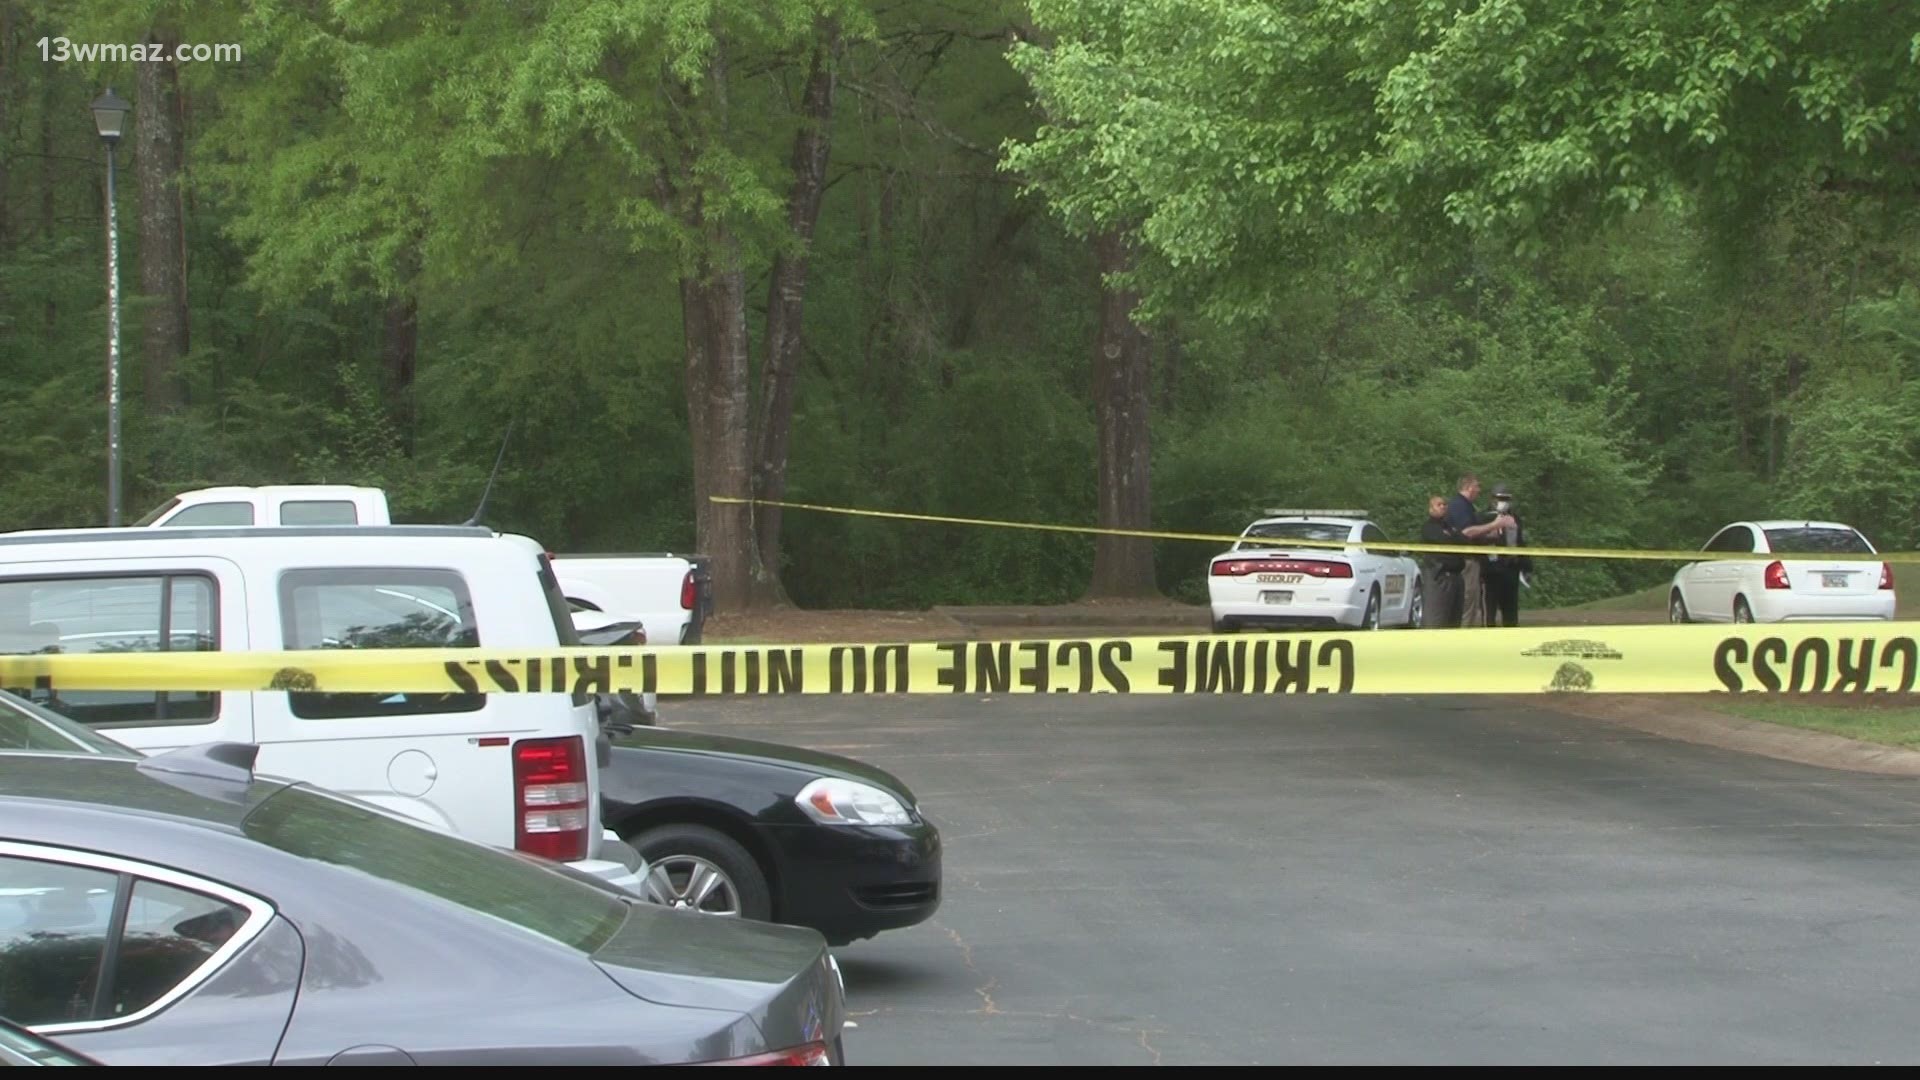 The Bibb County Sheriff's Office is investigating after a man was found shot to death at a Macon apartment complex Thursday morning.